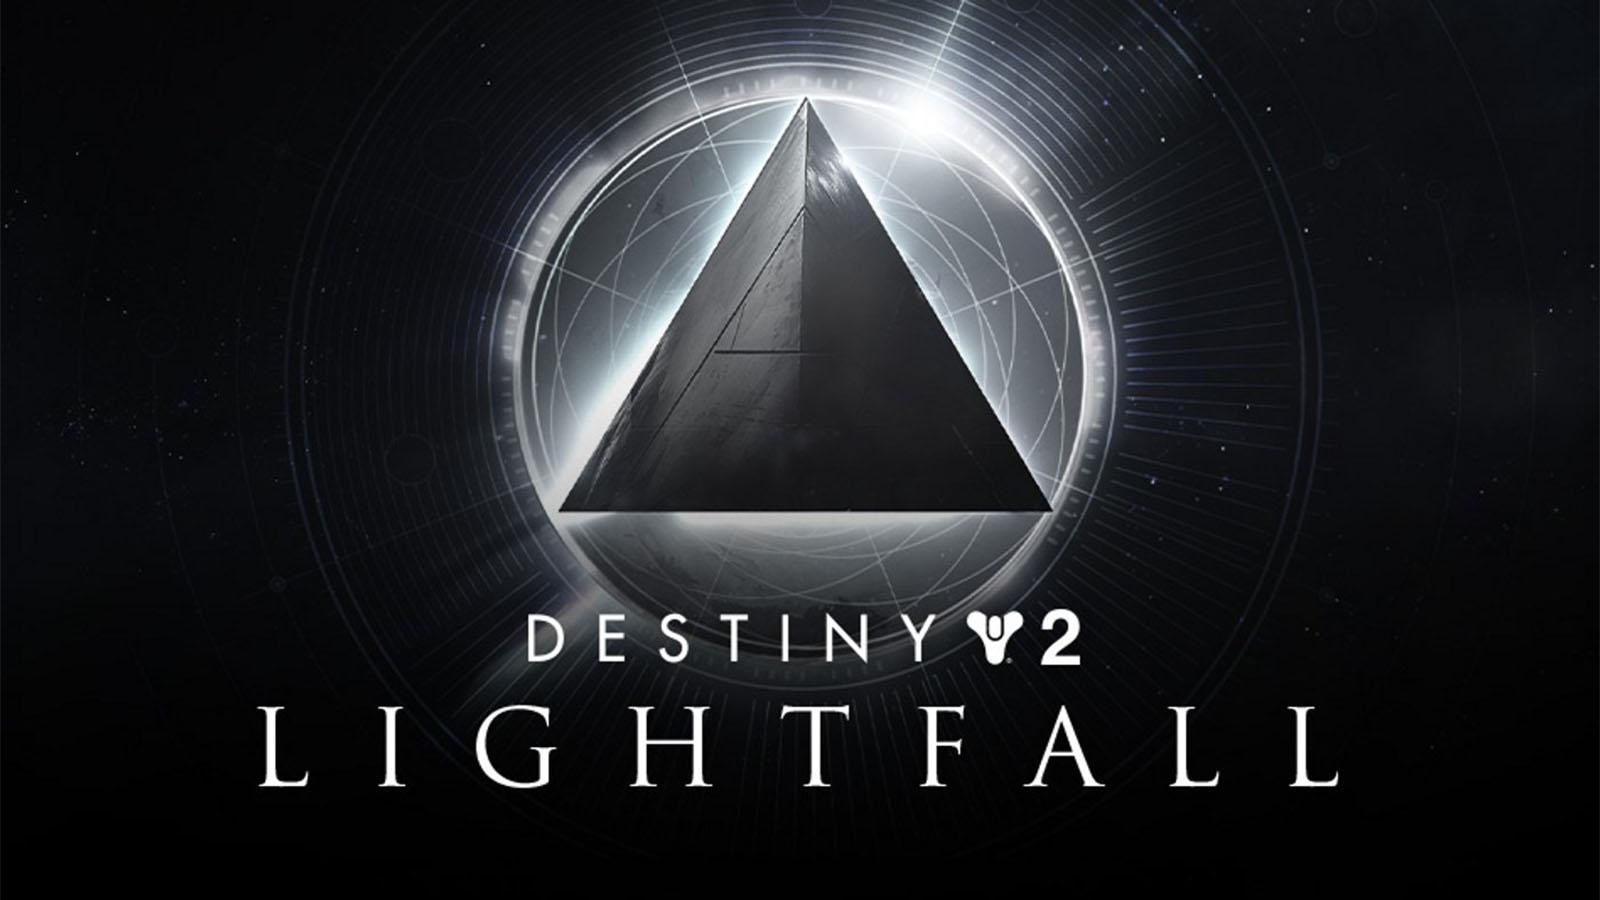 Destiny 2 Lightfall Will Feature Legendary Campaign Difficulty, Bungie Confirms